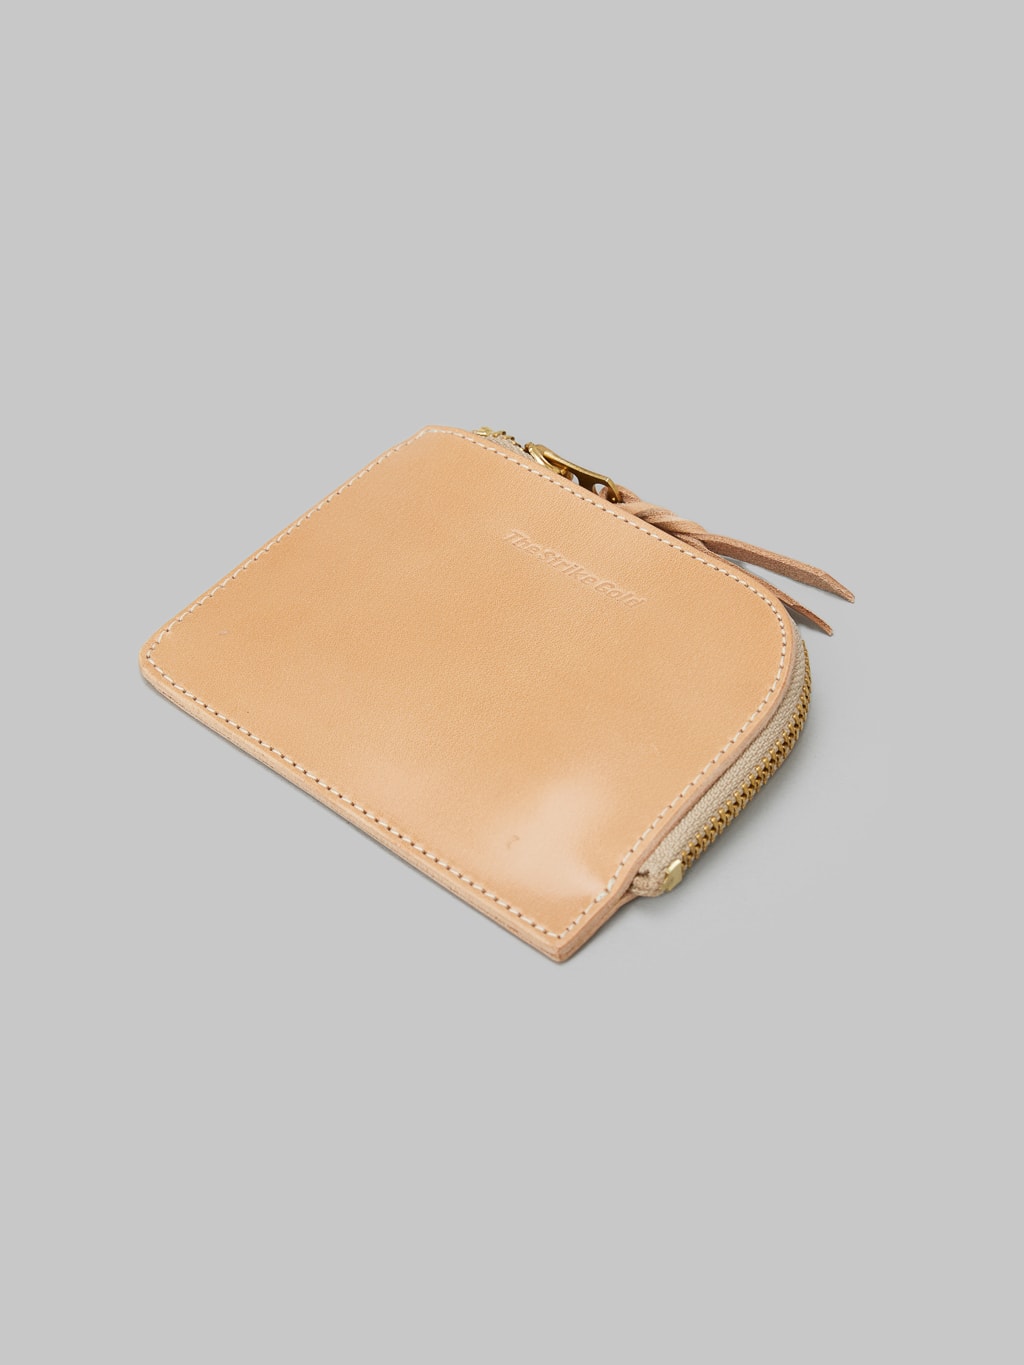 The Strike Gold Leather Zip Wallet Natural front view